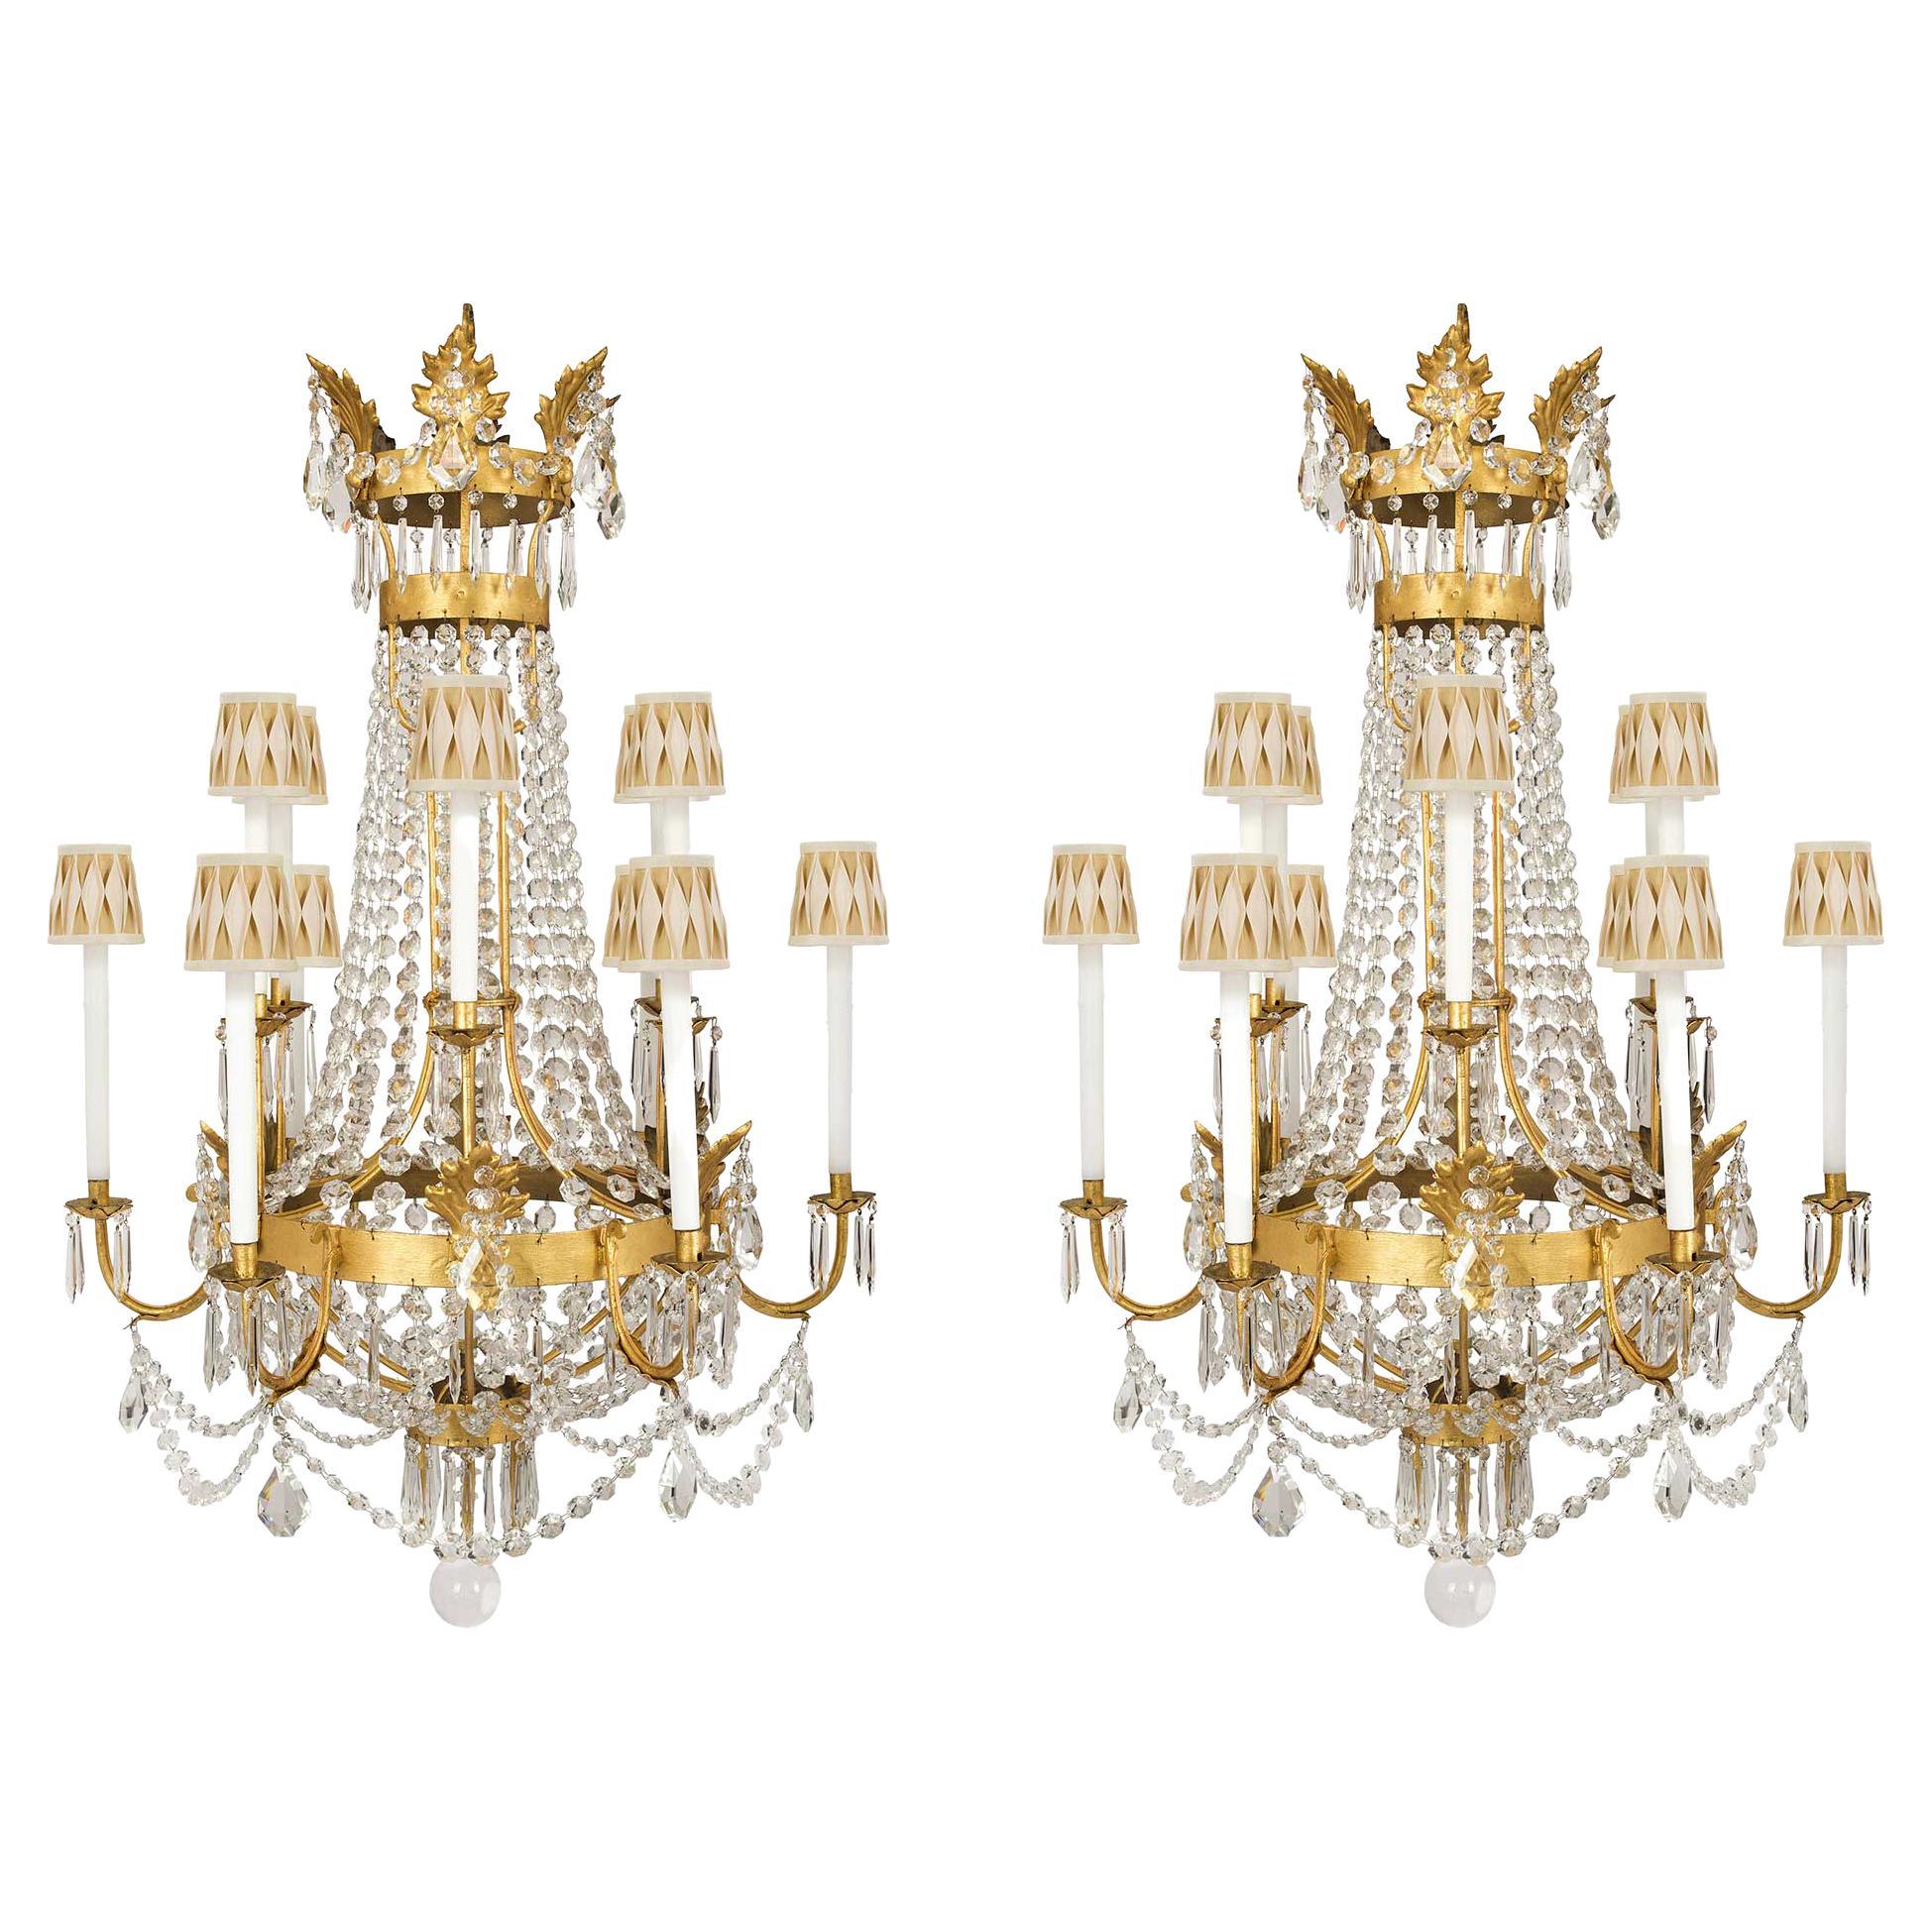 Pair of Italian 19th Century Baccarat Crystal and Gilt Iron Chandeliers For Sale